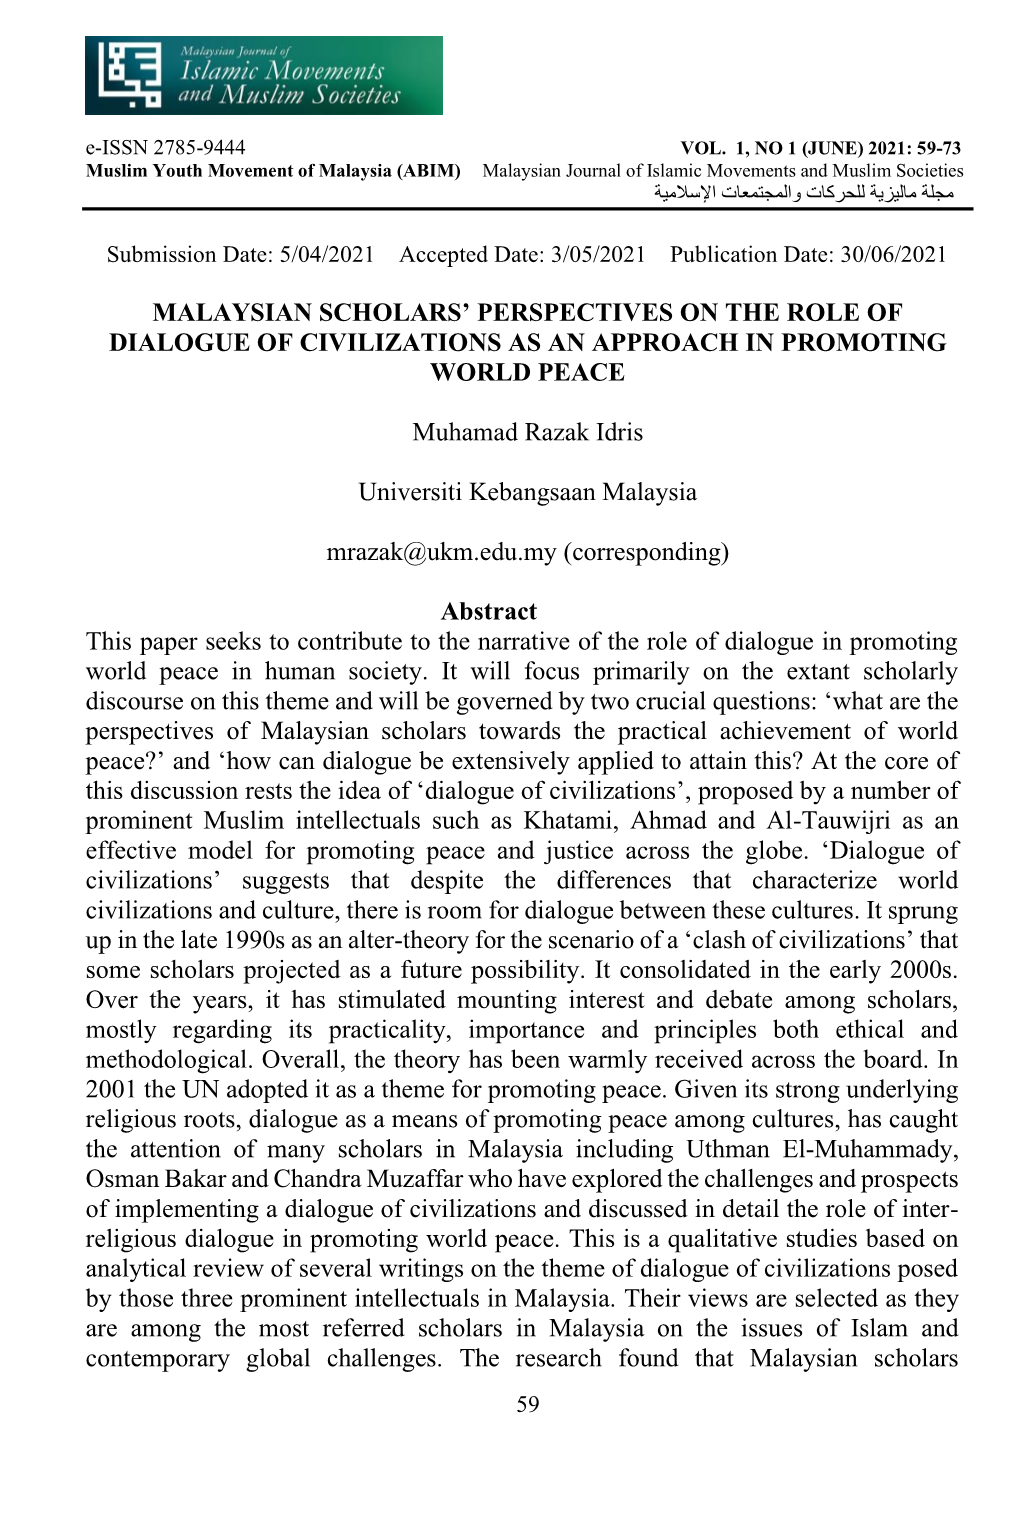 Malaysian Scholars' Perspectives on the Role Of